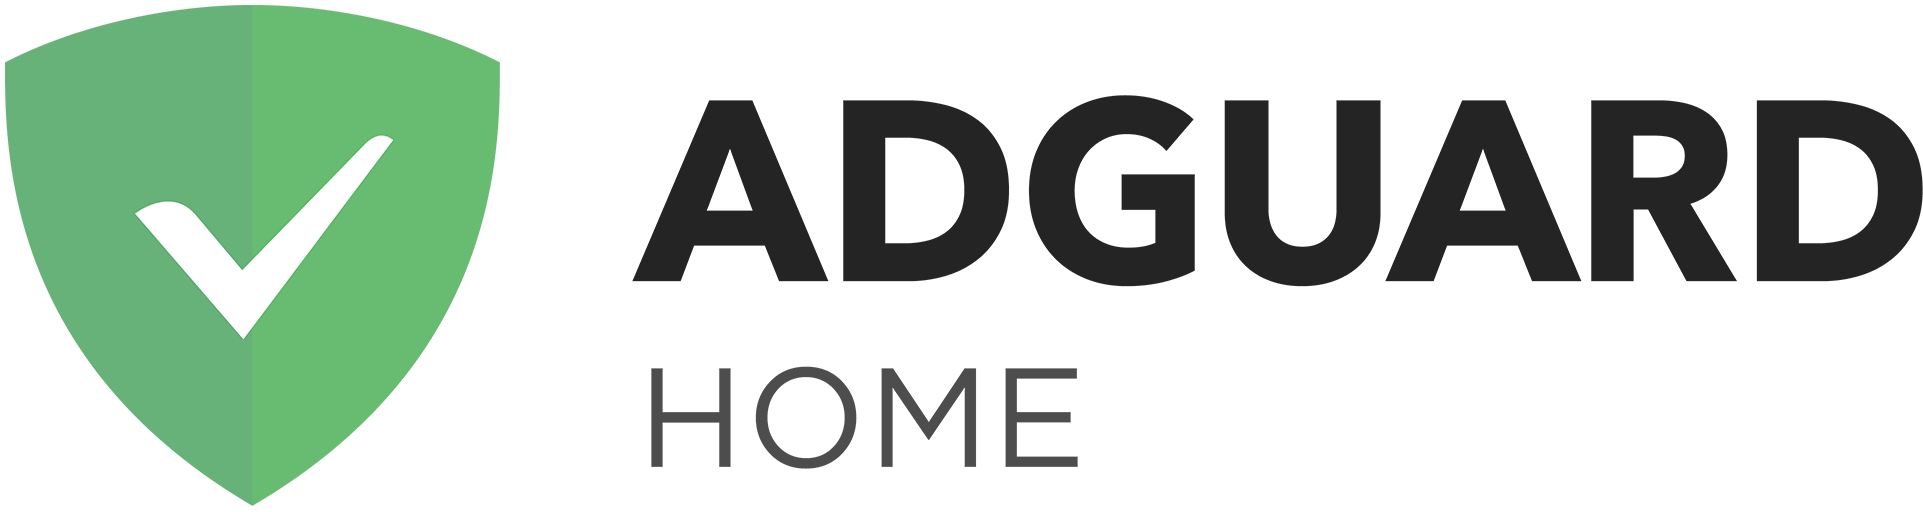 is adguard home free